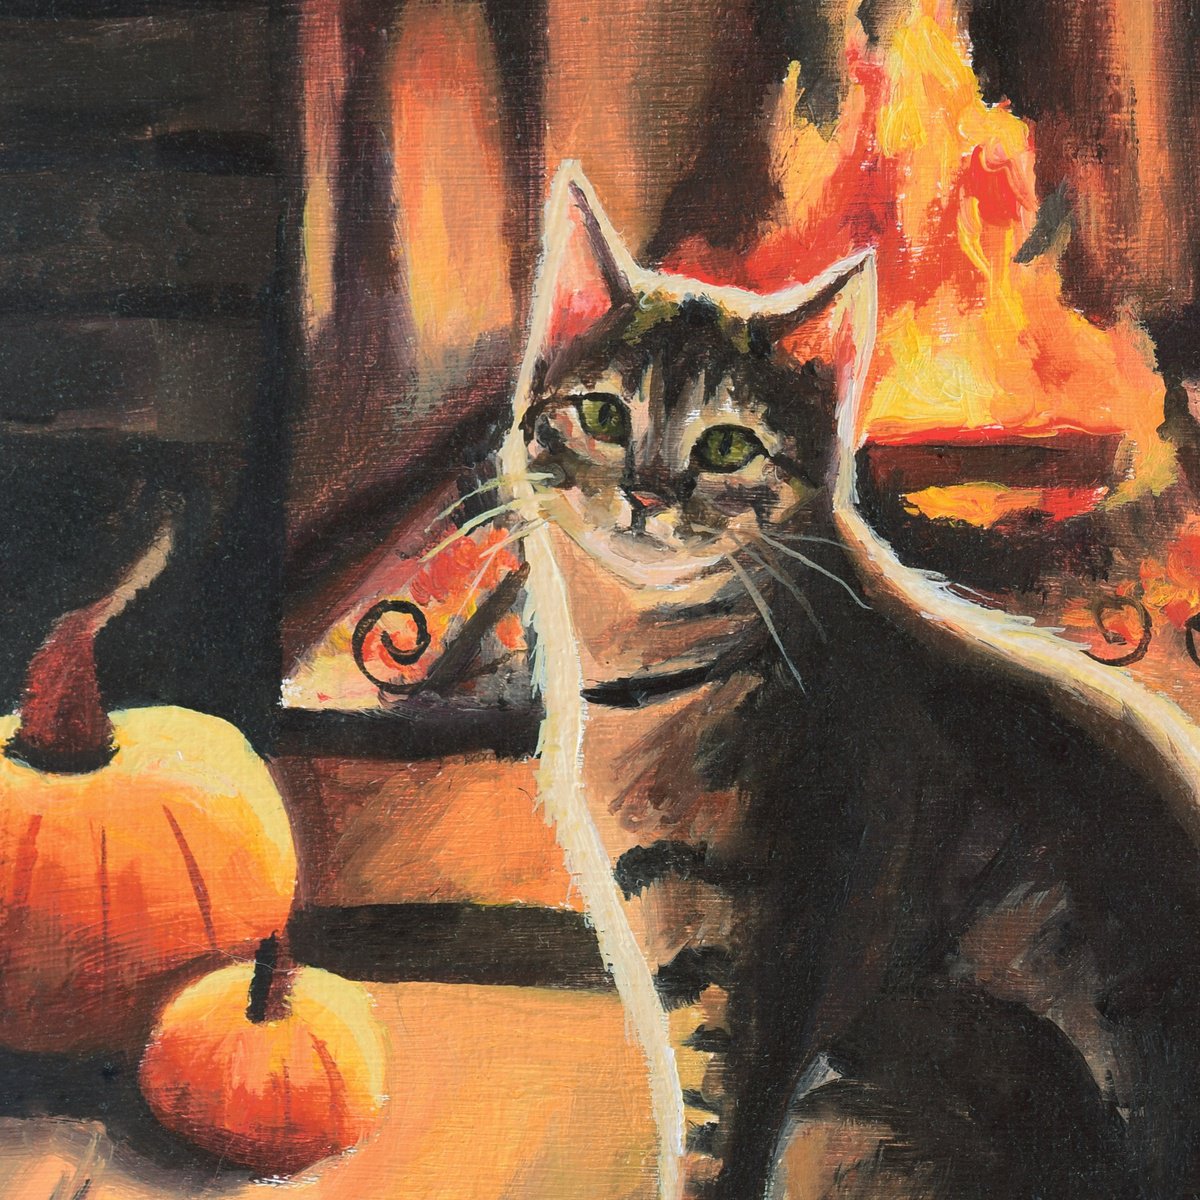 Cat in a cozy autumn fireplace by Lucia Verdejo